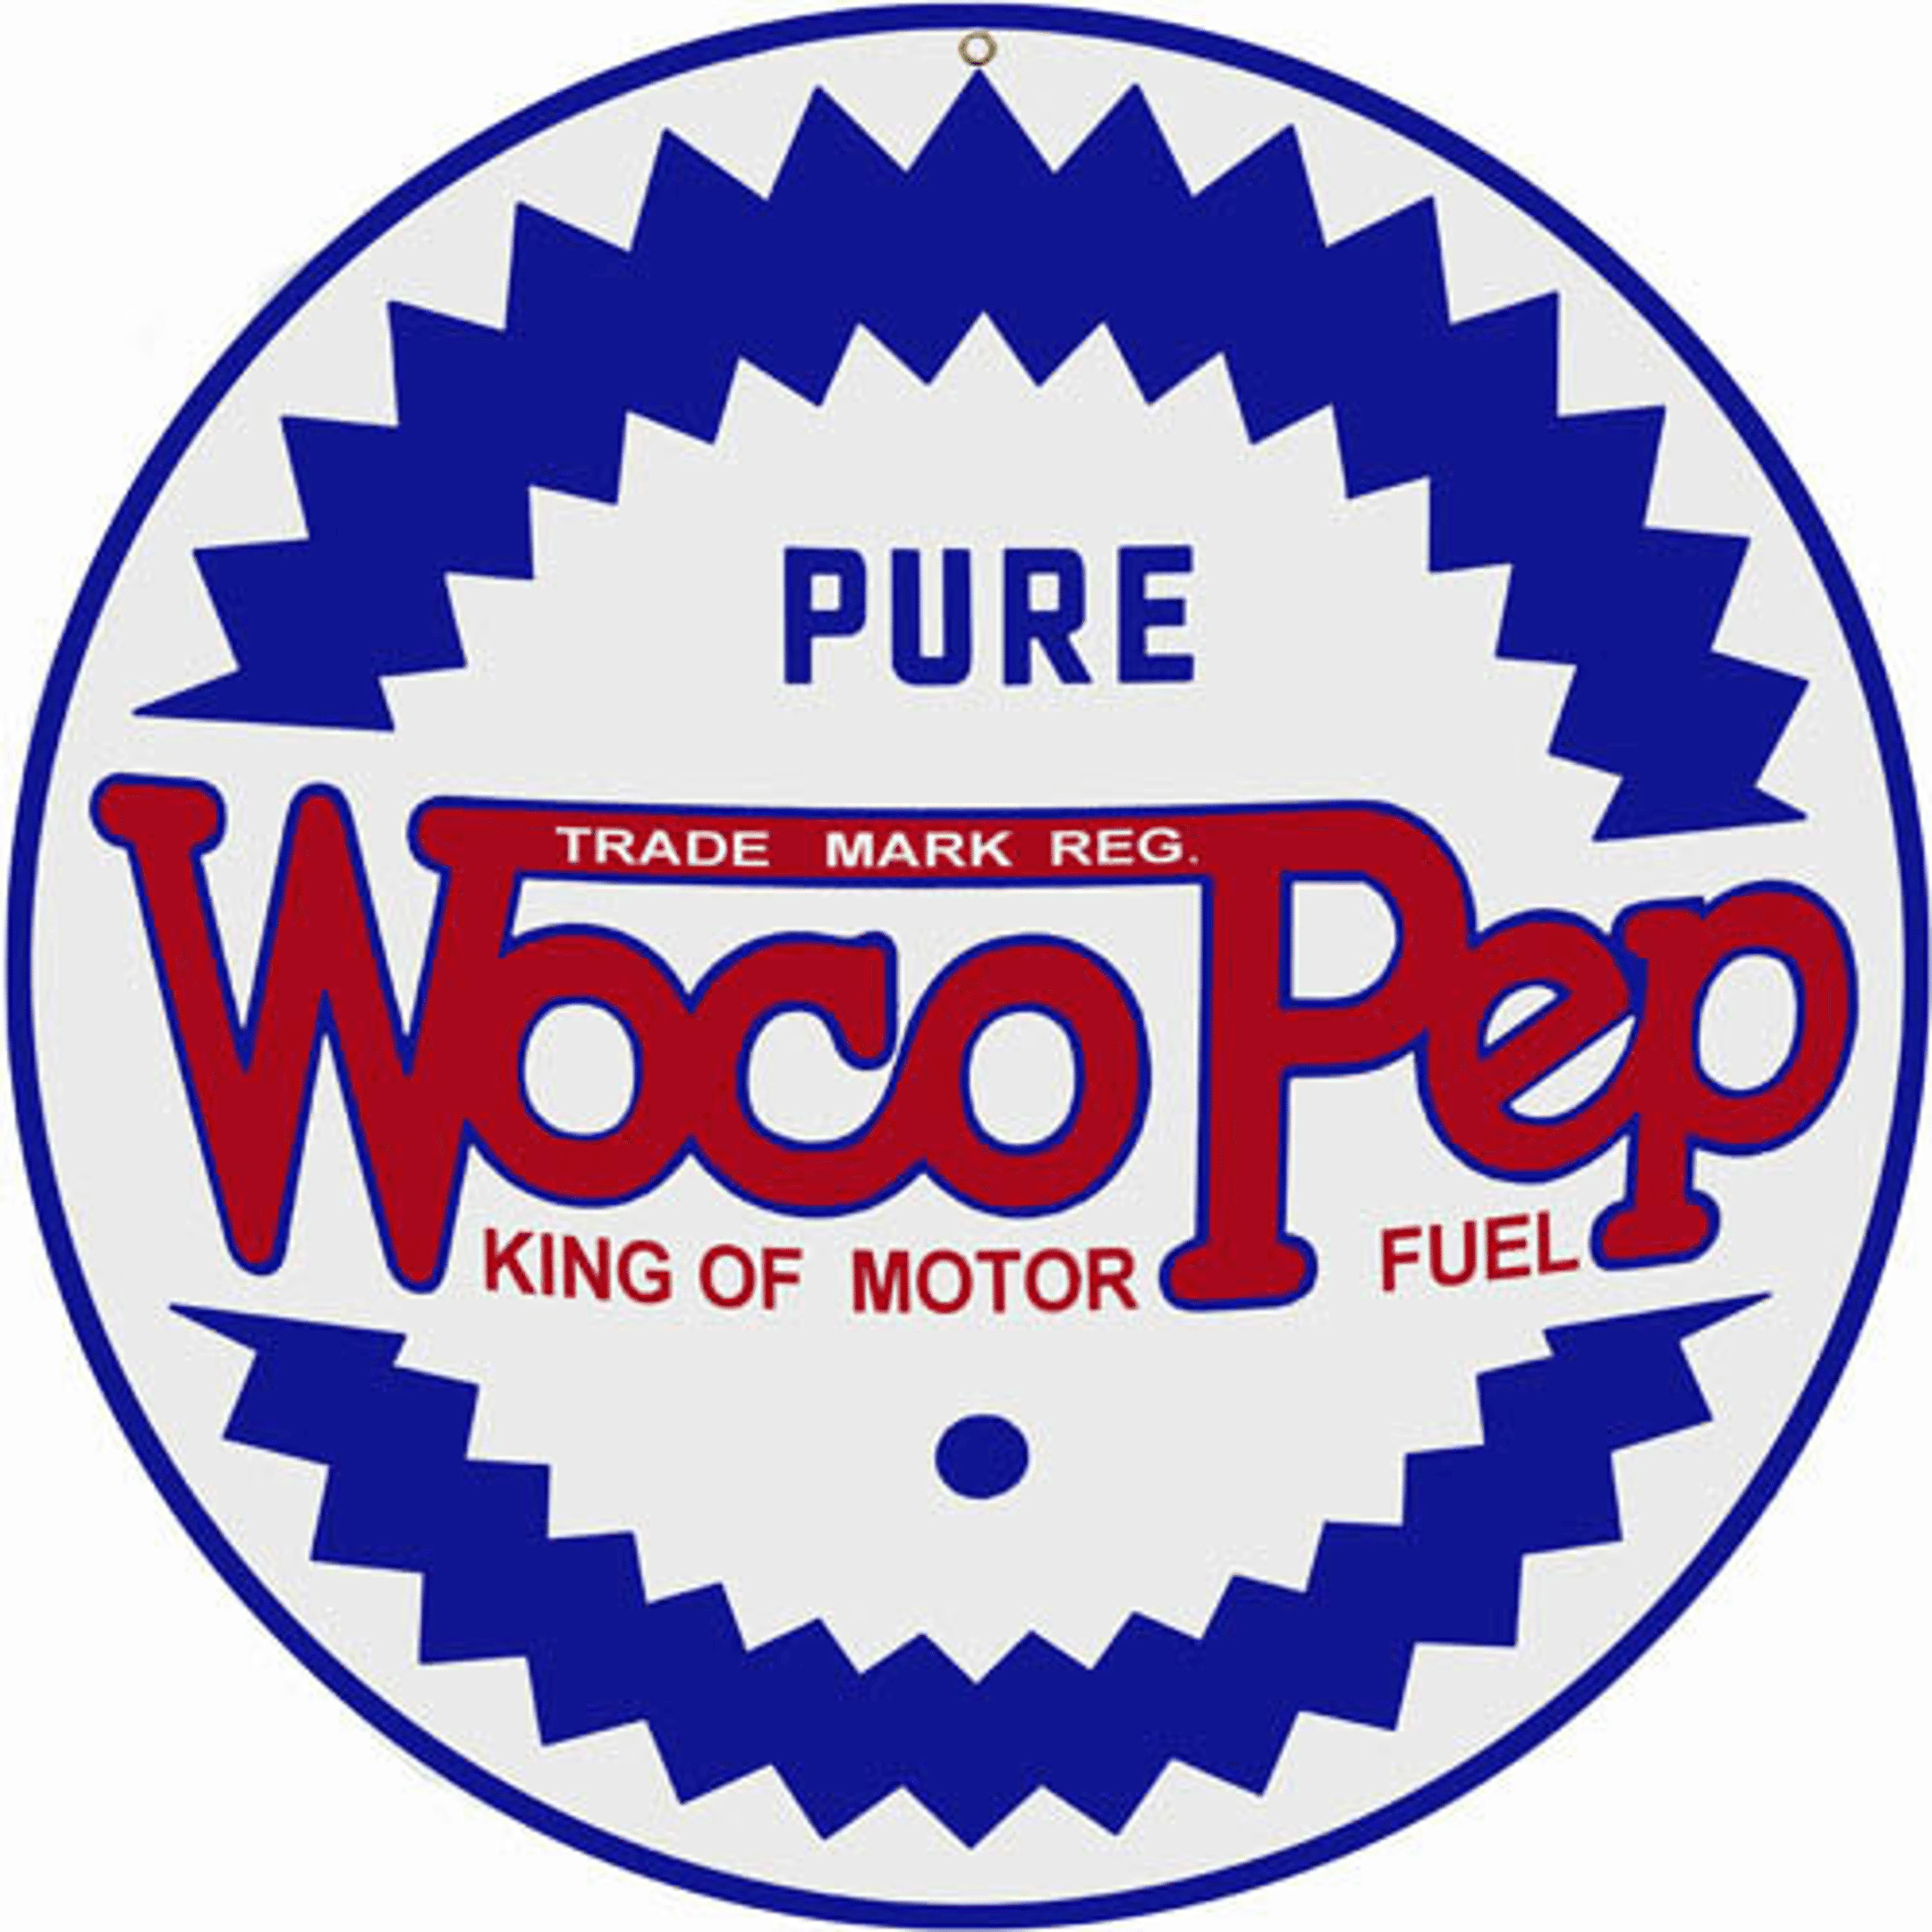 Pure Woco Pep Motor Oil Aged Style Aluminum Metal Sign 3 Sizes Available Vintage Style Retro Garage Art RG